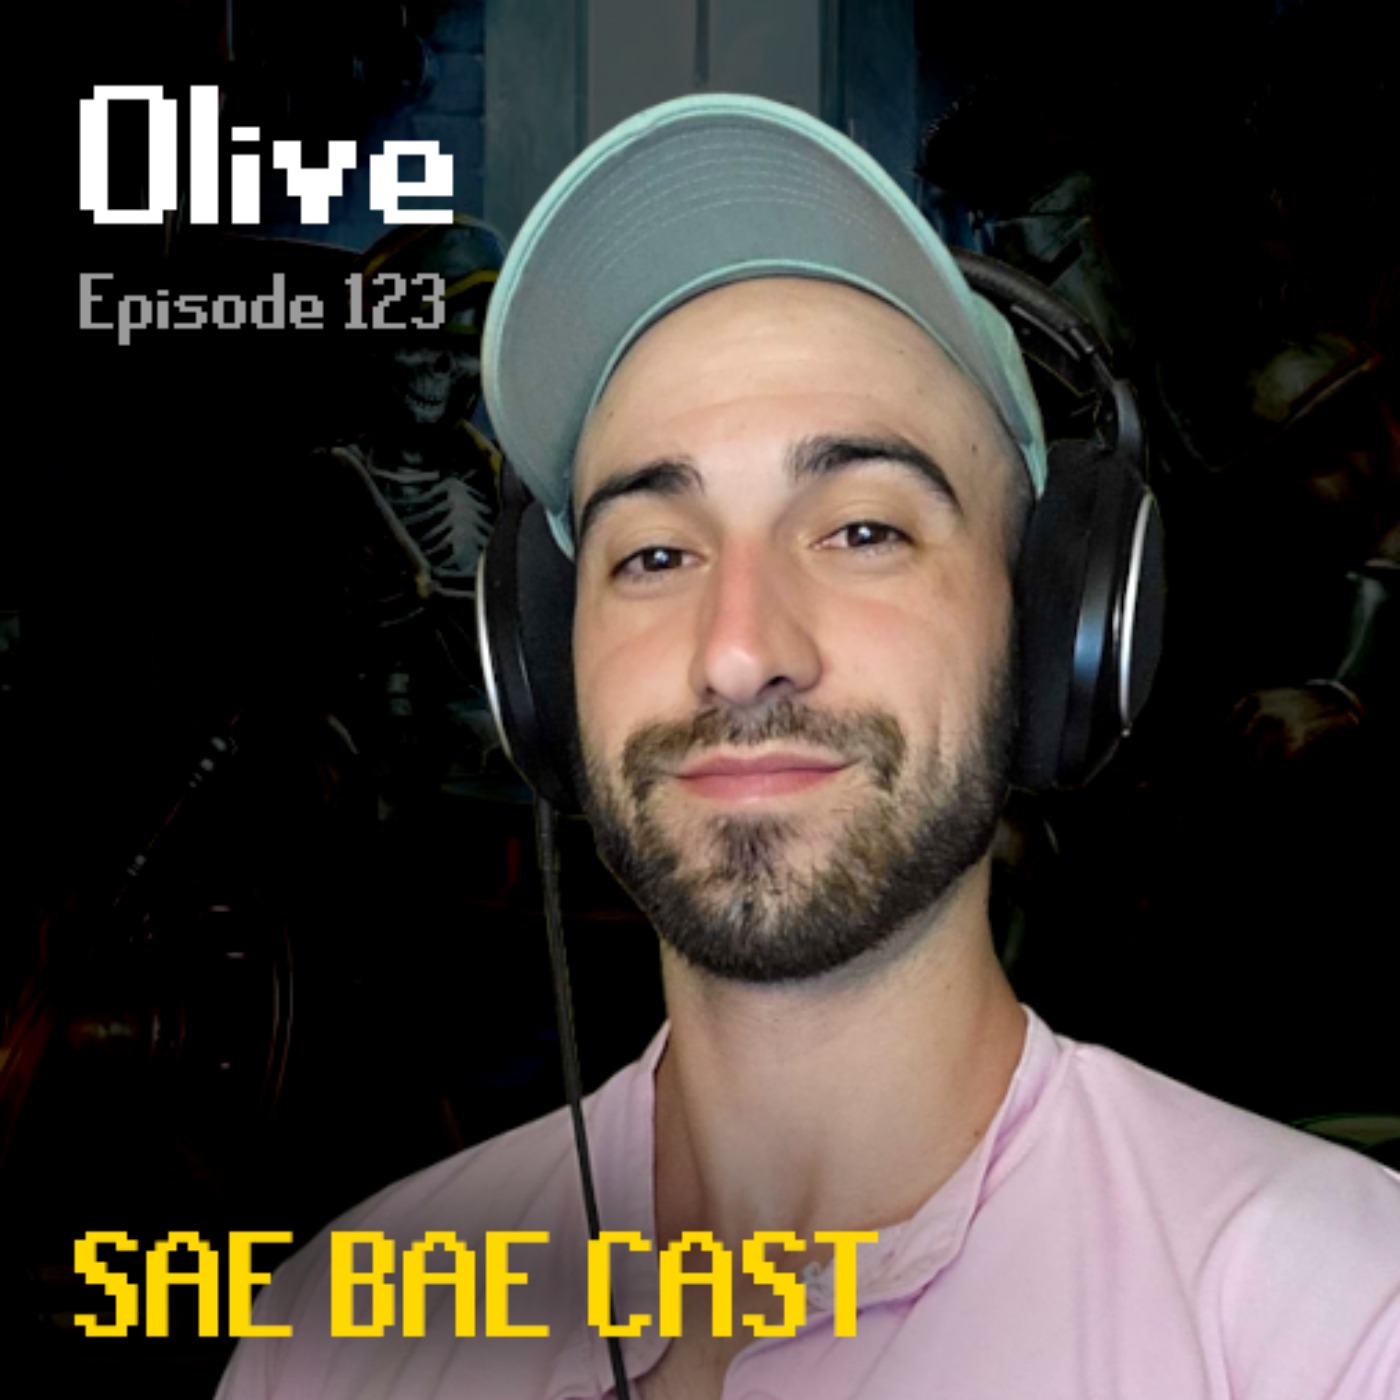 Olive - 1 Defense, Pure Accounts, Forestry, Food, Pets, Positivity | Sae Bae Cast 123